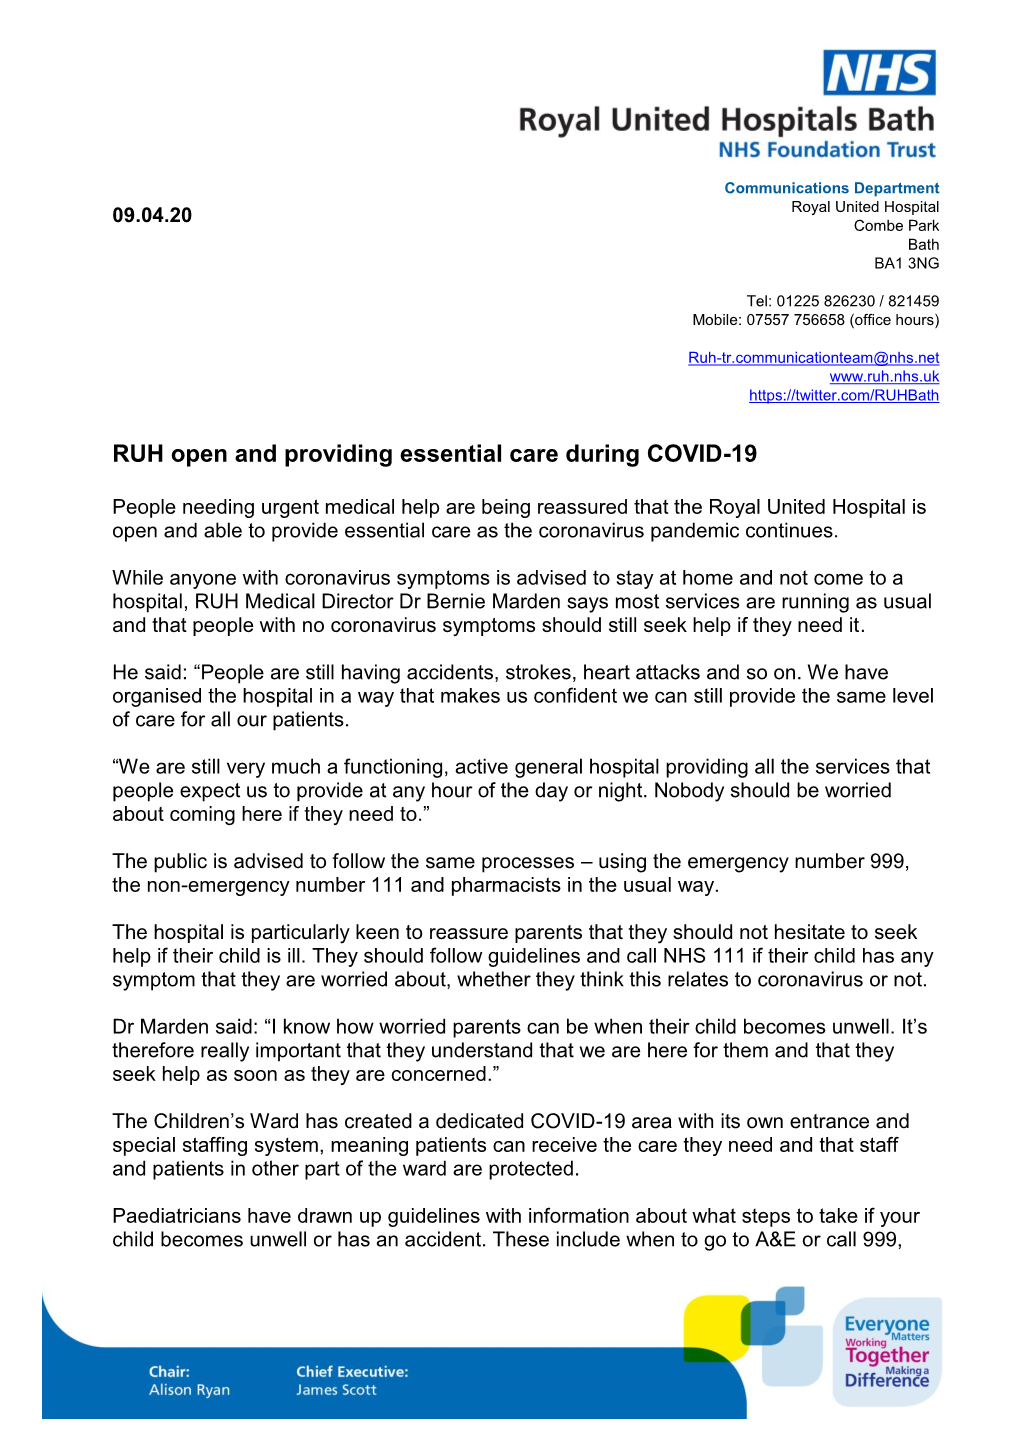 RUH Open and Providing Essential Care During COVID-19